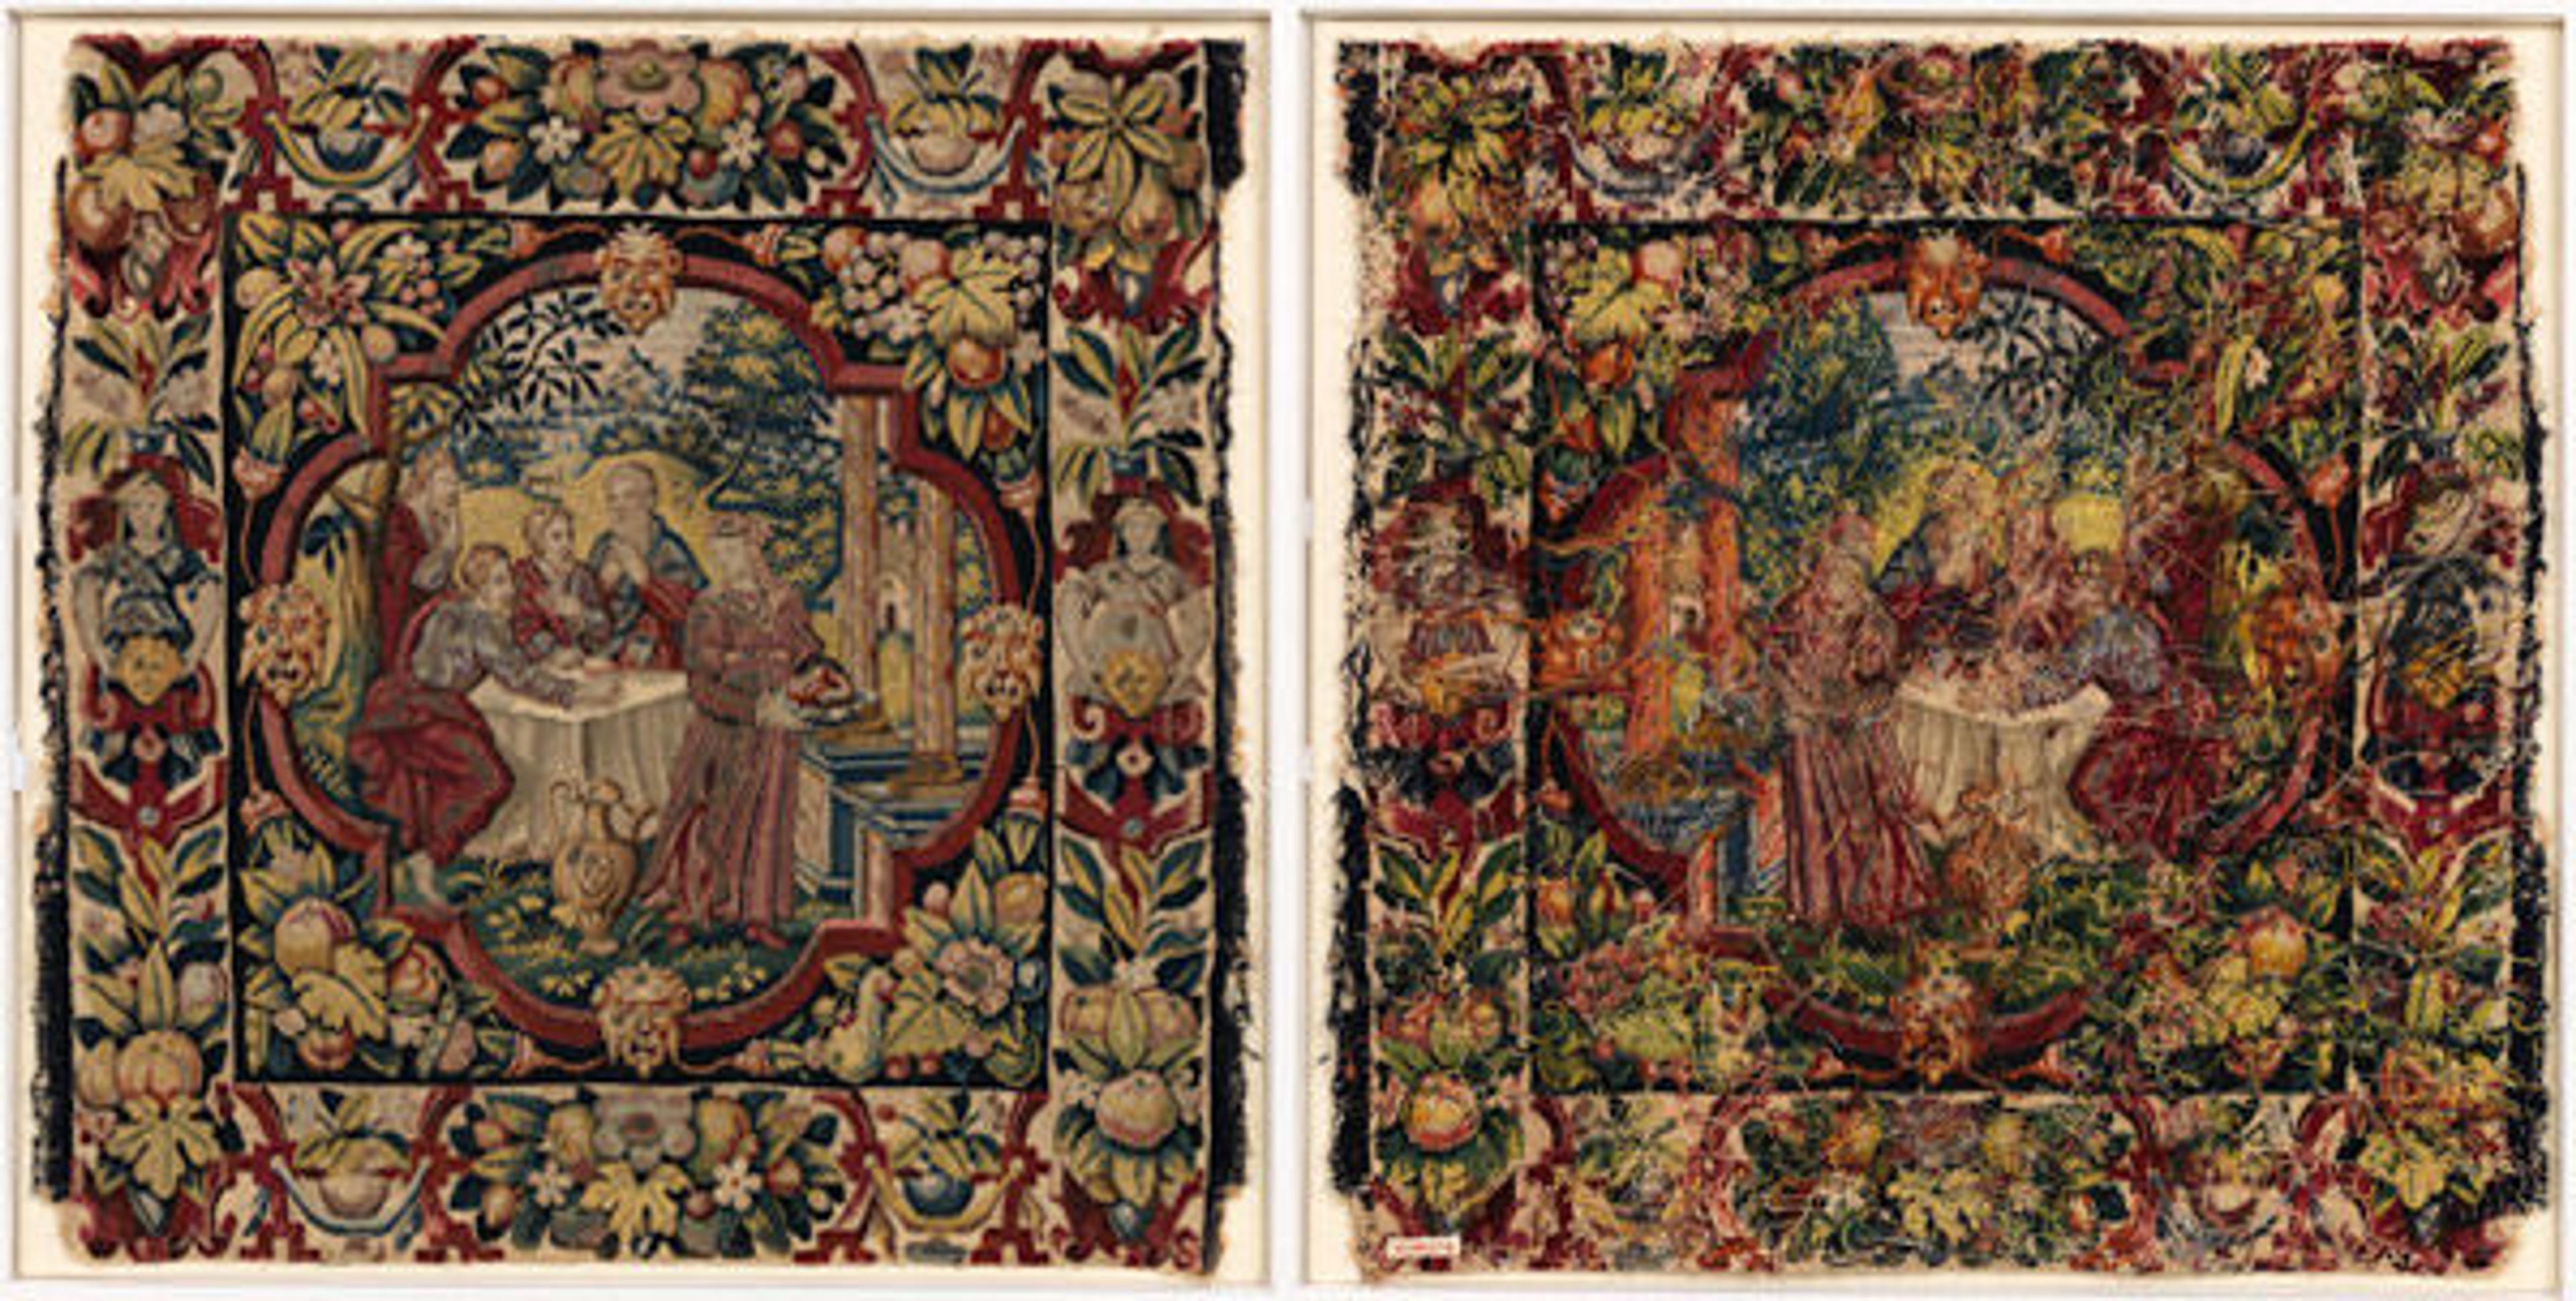 Abraham Entertaining the Angels from Scenes from the Lives of Abraham and Isaac [Left: front; Right: back]. Flemish, ca. 1600 (41.100.57e)